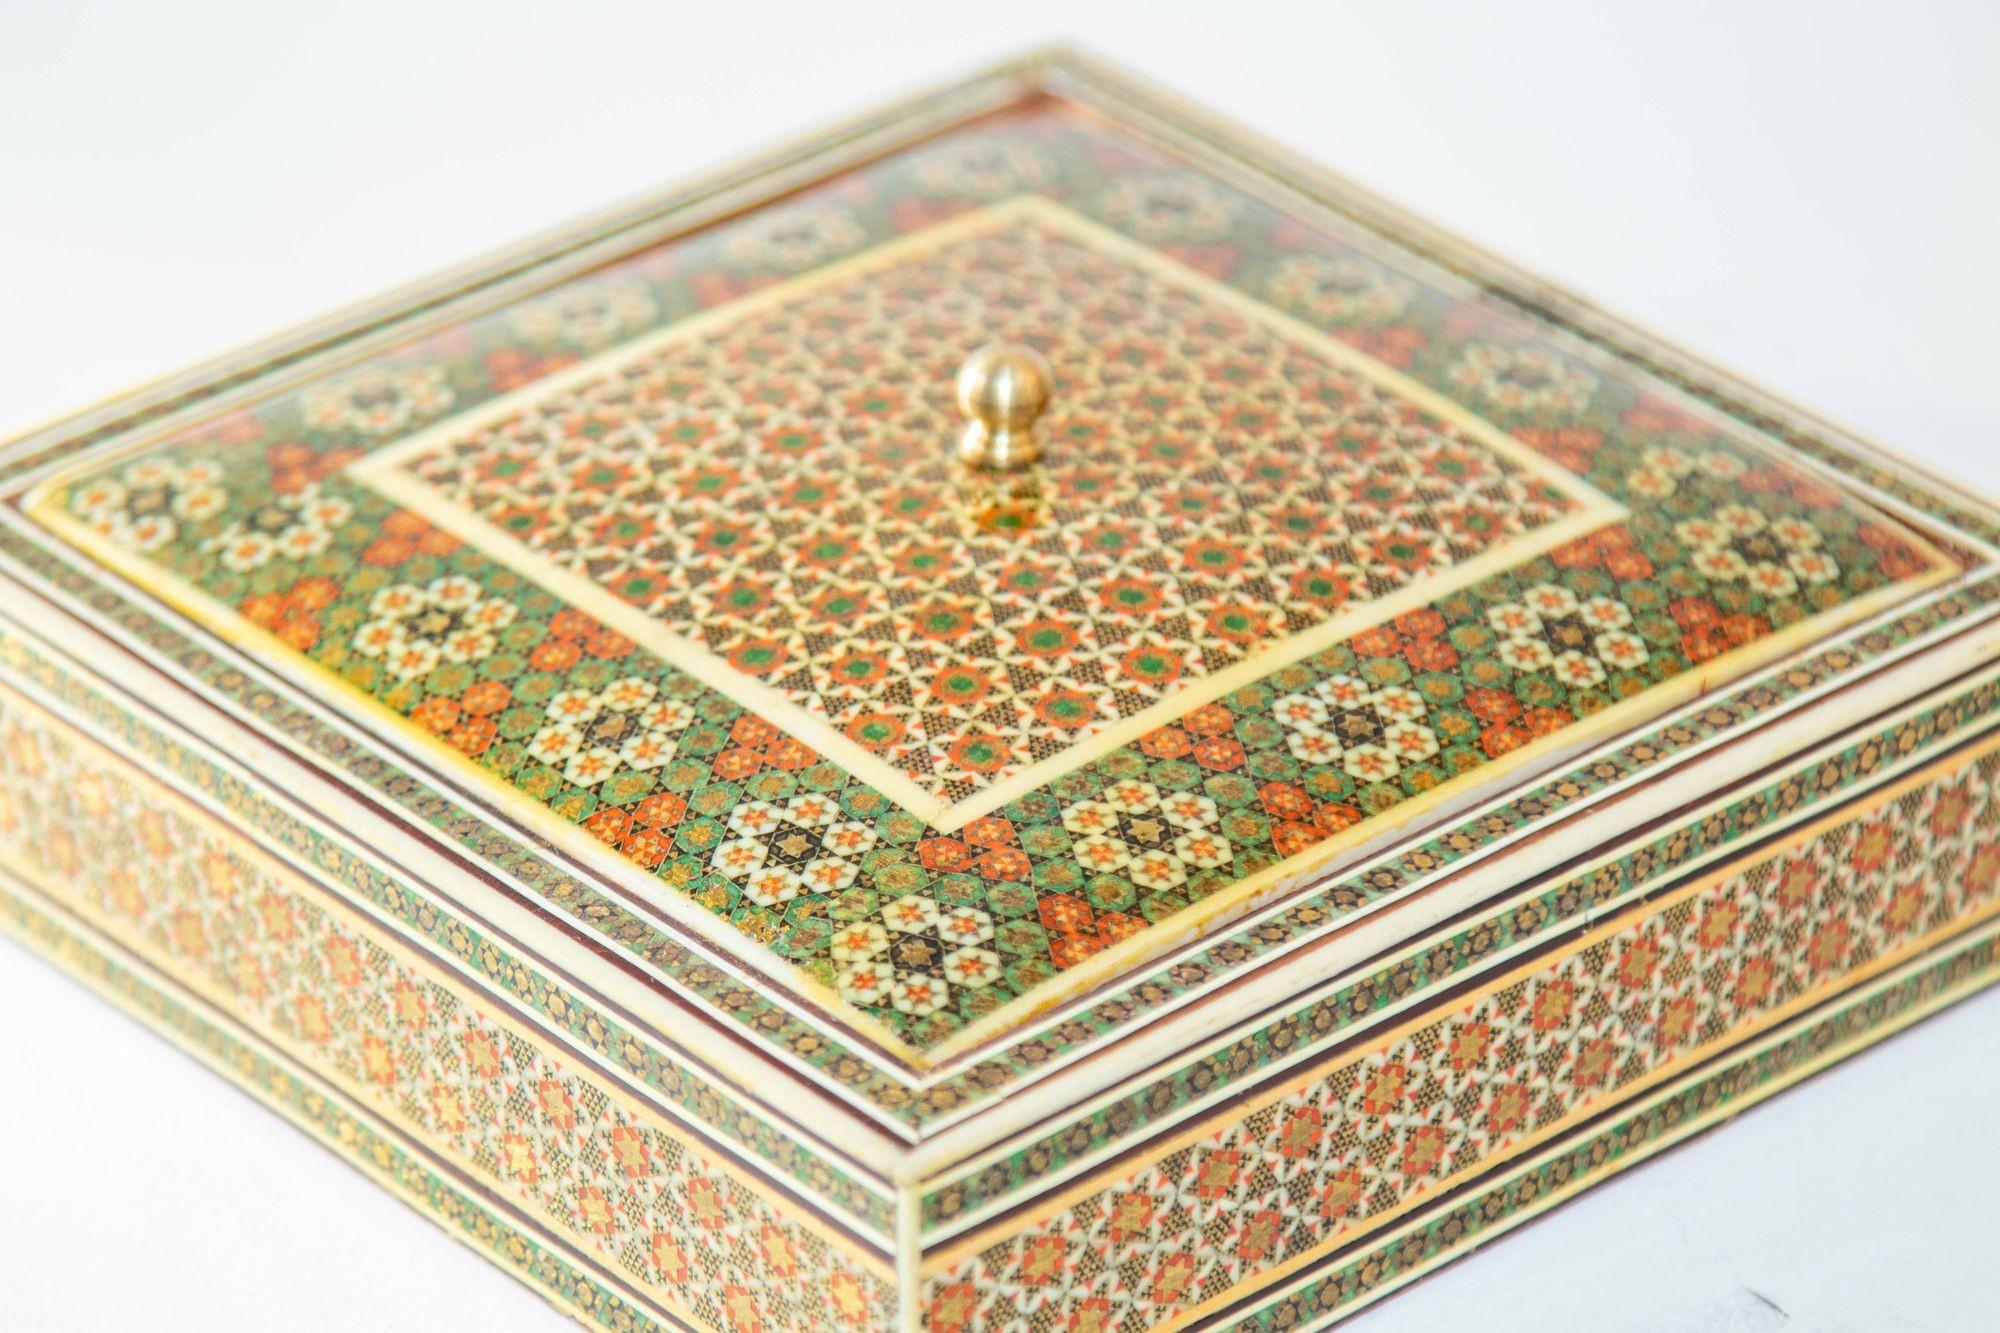 Hand-Crafted 1950s Anglo Indian Micro Sadeli Mosaic Inlaid Jewelry Box For Sale